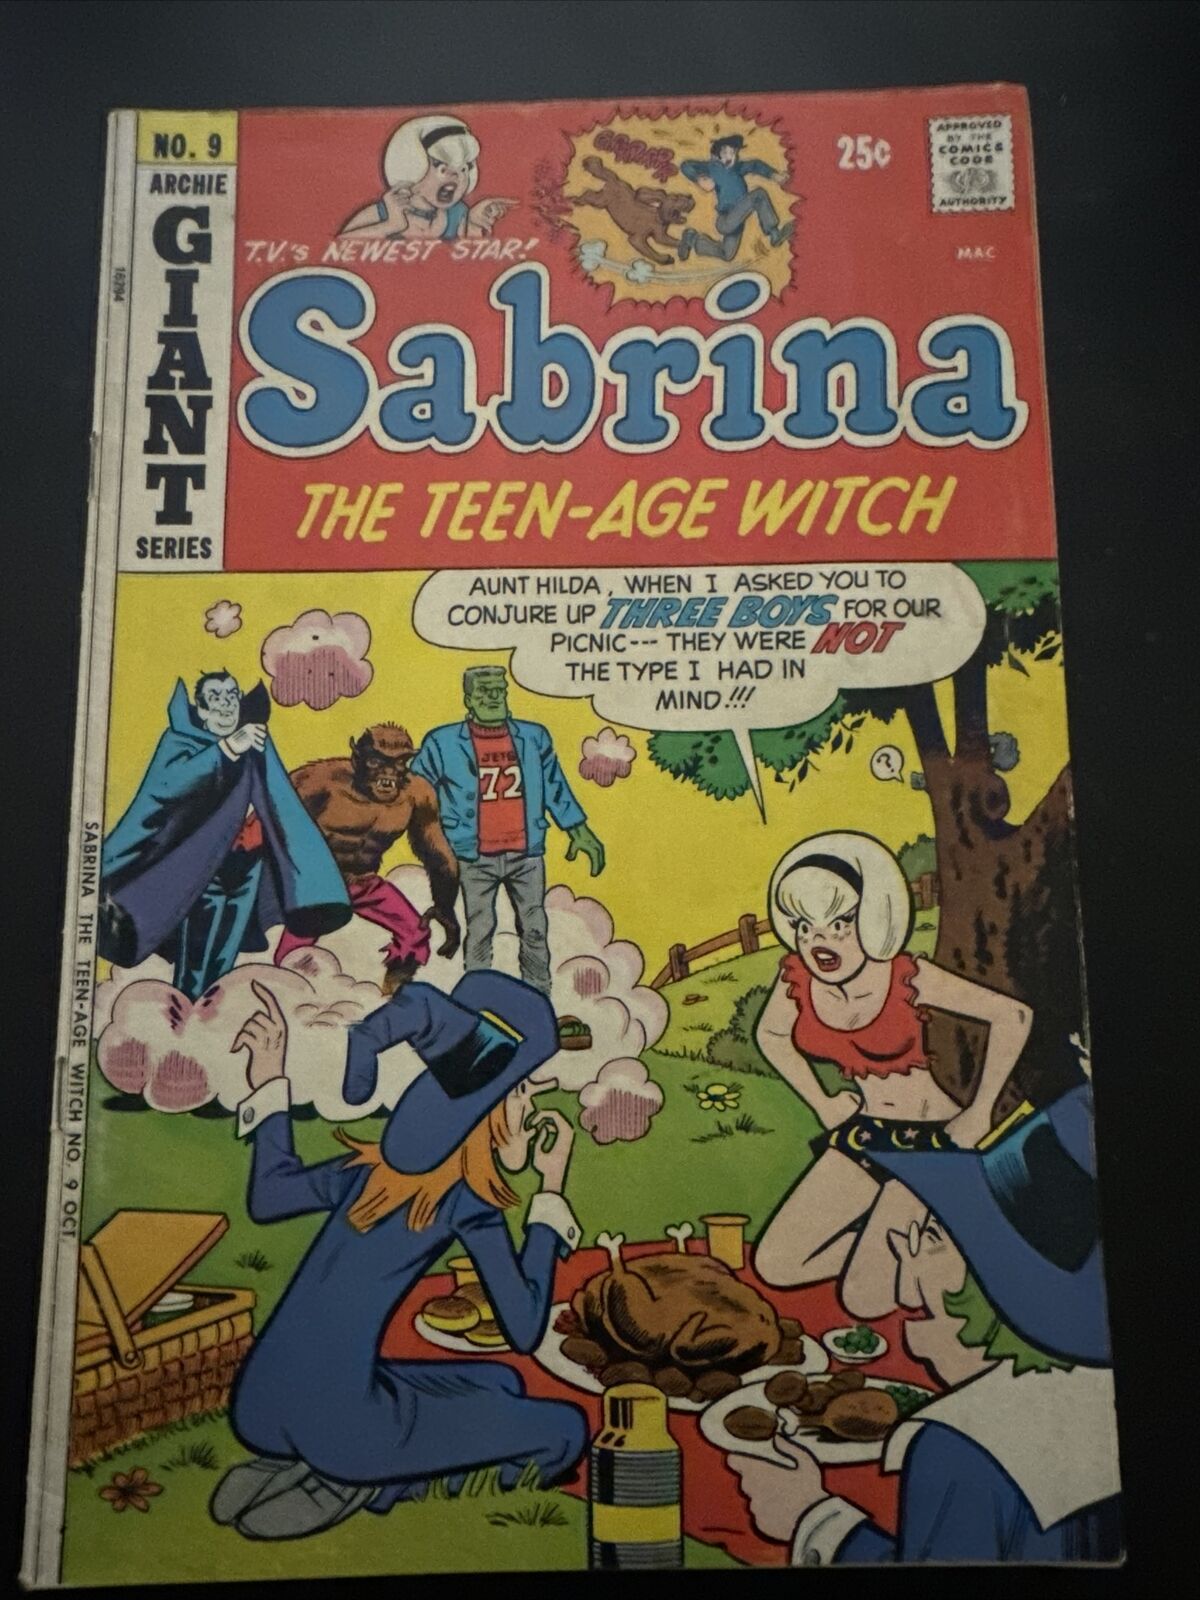 SABRINA THE TEENAGE WITCH #9 VF UNIVERSAL MONSTERS DAN DECARLO COVER 1971 Rare